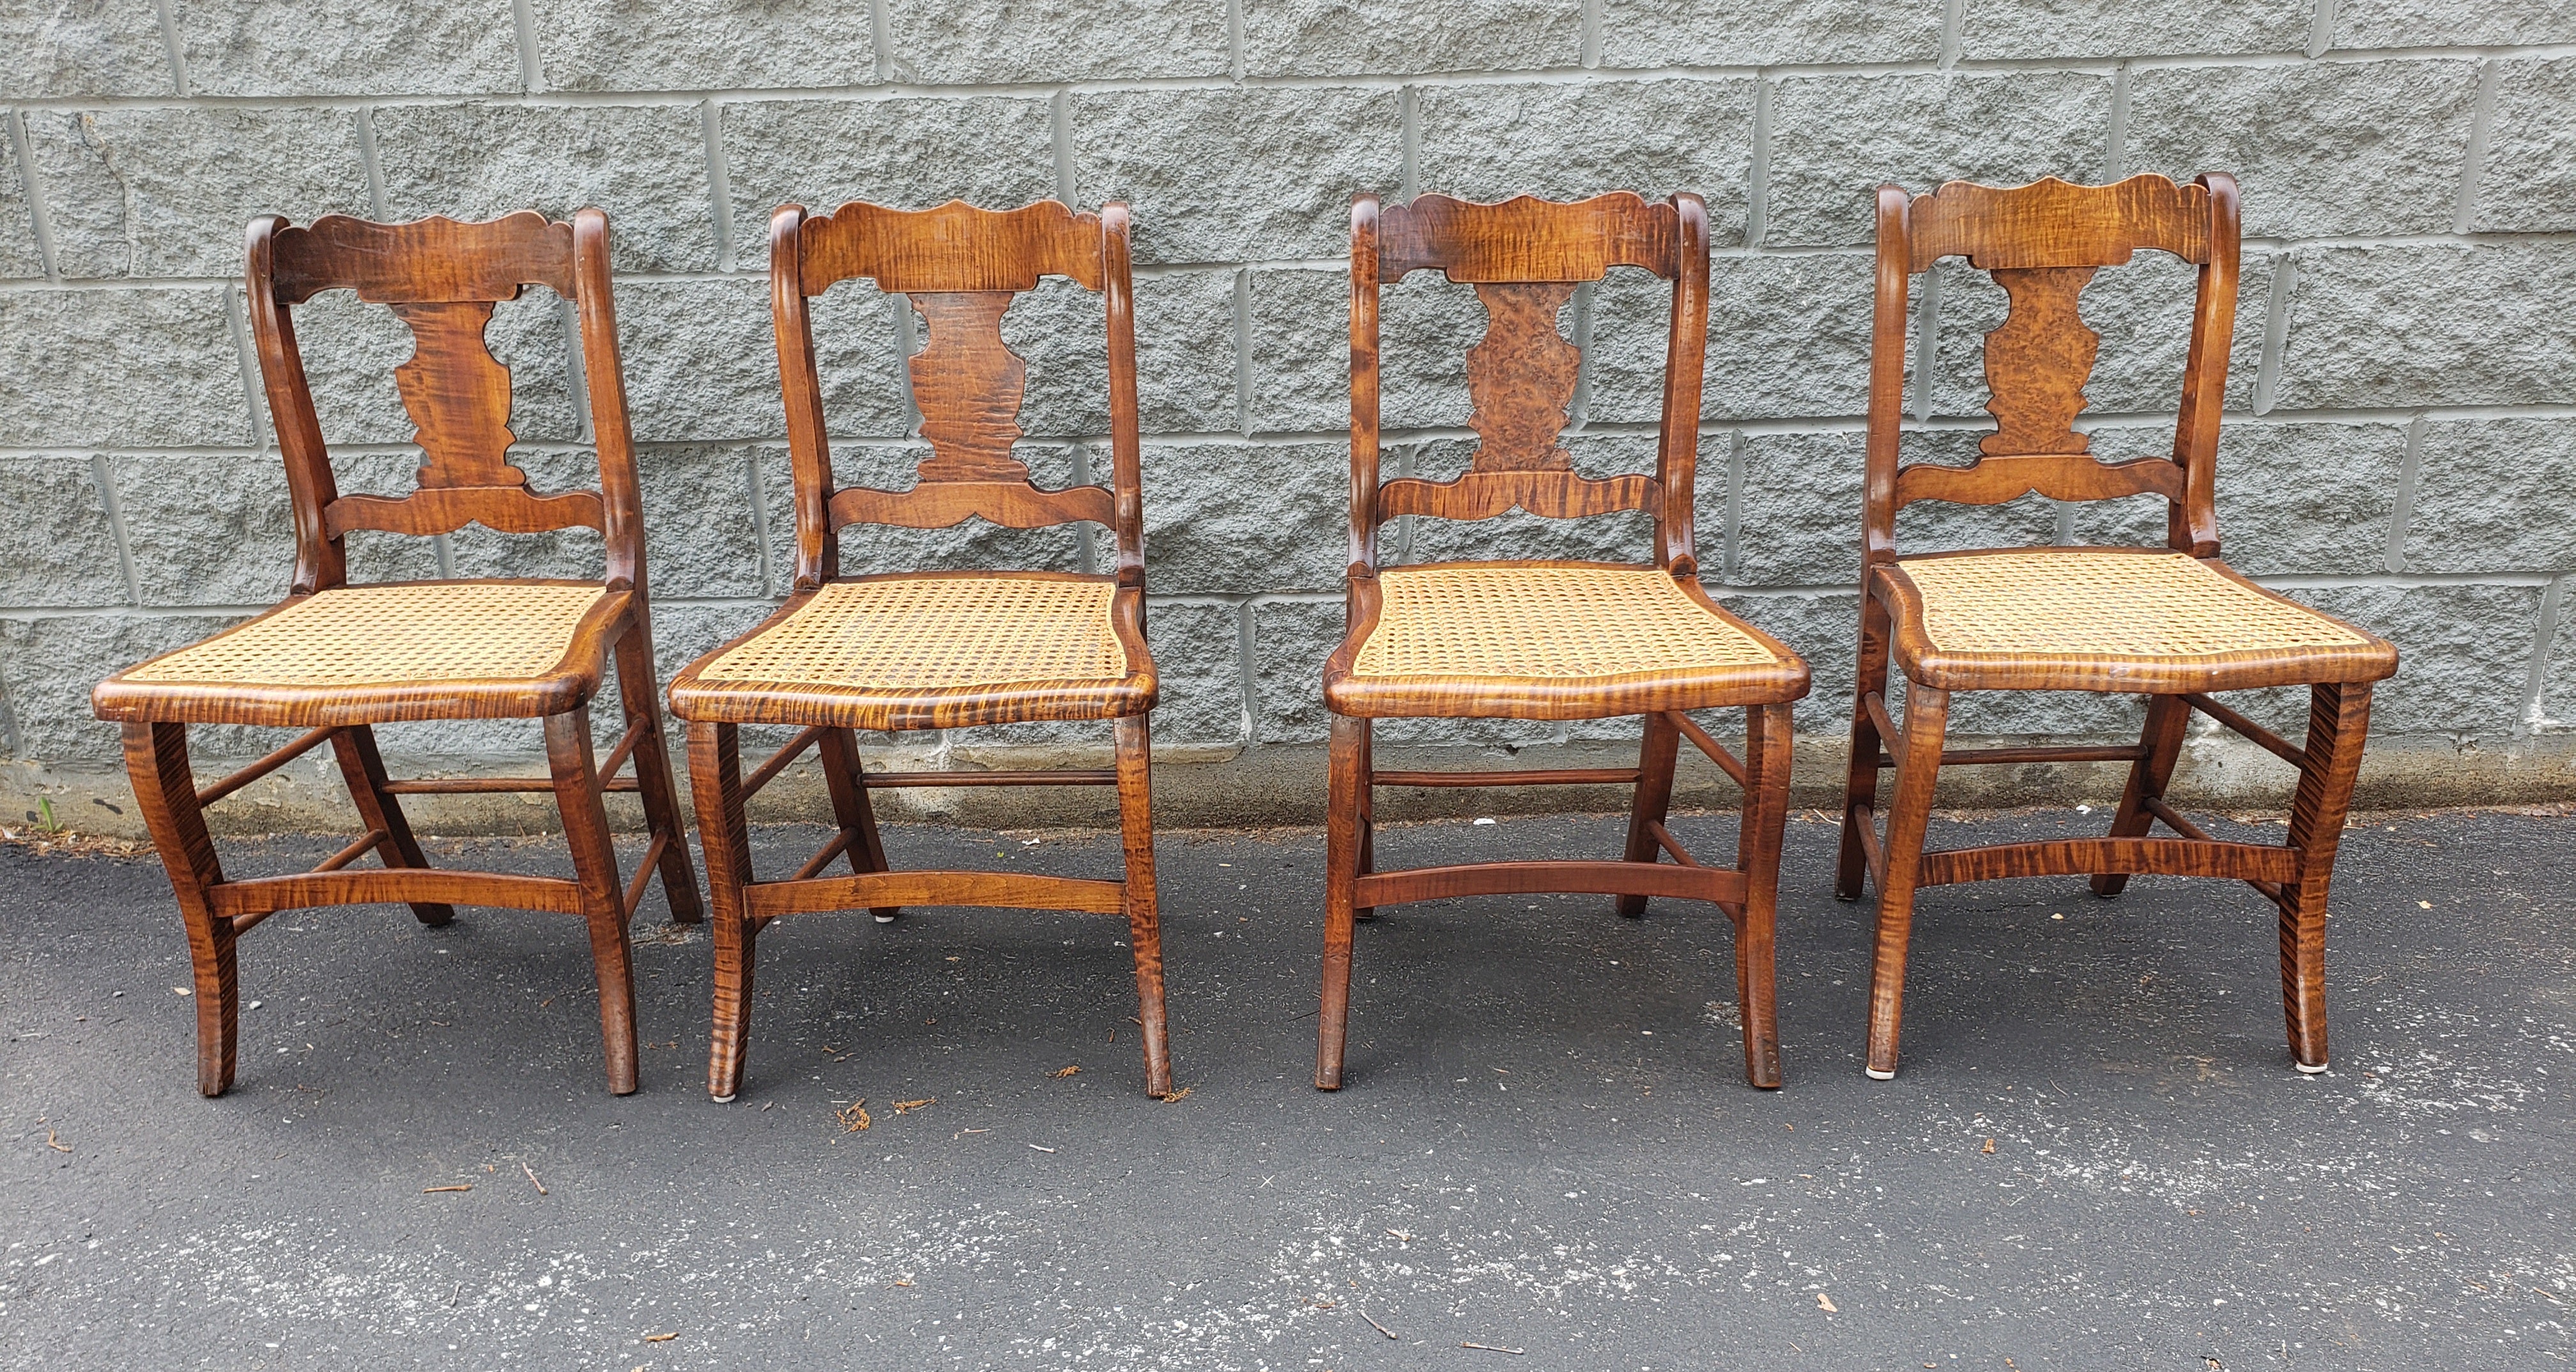 Beautiful set of 4 early American style side chairs in tiger wood and newly reacned seats. Chair have been recently refinished and recaned. Measures 17.5